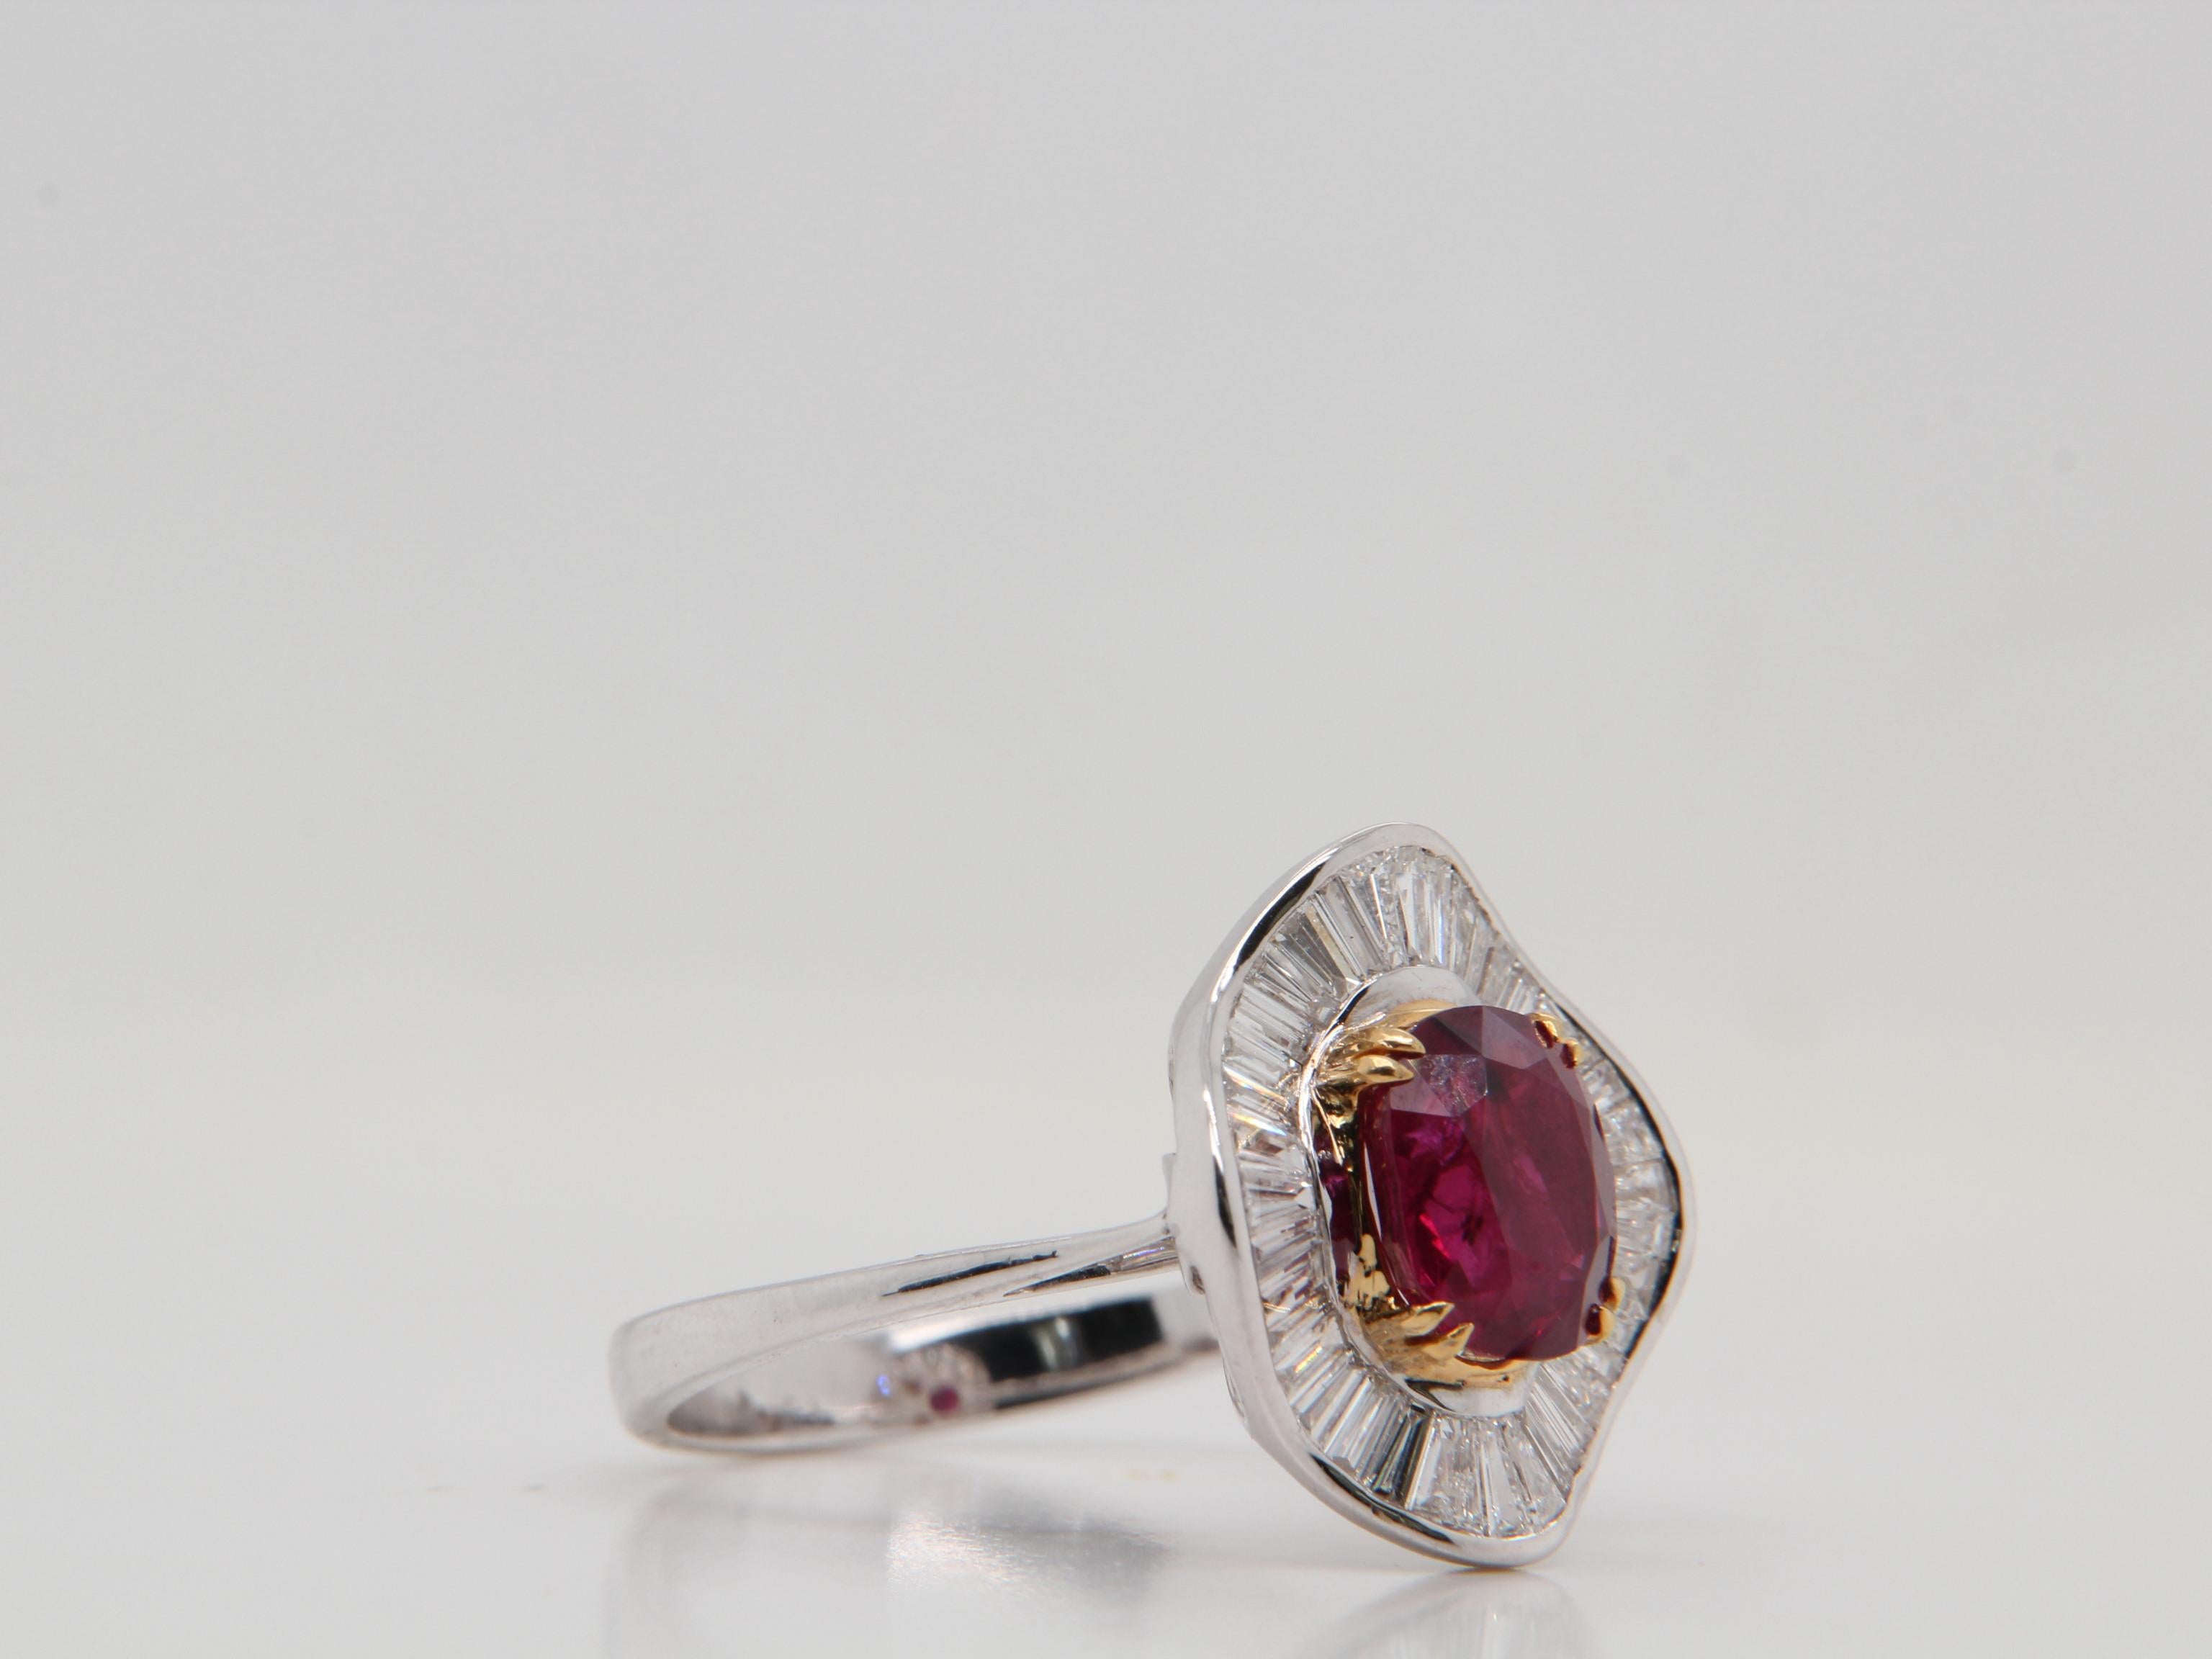 A brand new 3.04 carat Burmese ruby ring mounted with diamonds in 18 Karat gold. The ruby weighs 3.04 carat and is certified by Gem Research Swisslab (GRS) as natural, no heat, and red The total diamond weight is 0.83 carat and the total rings